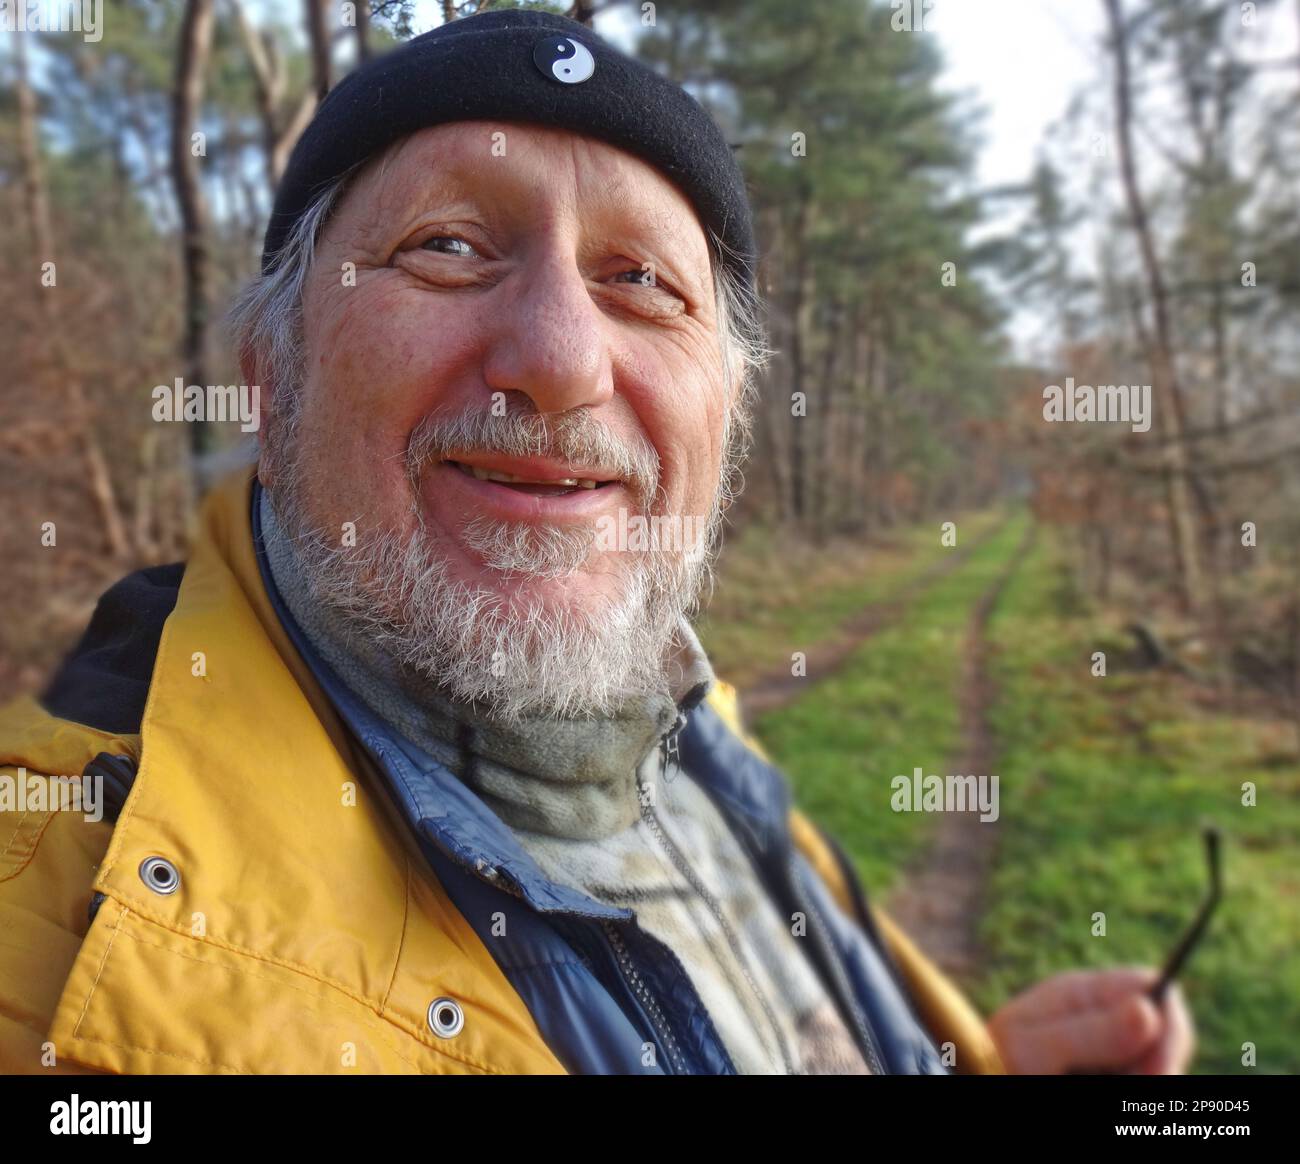 Friendly elderly man with beard and dockers cap looking into the camera. He took his glasses off. He's waking with yellow raincoat in the woods. Stock Photo